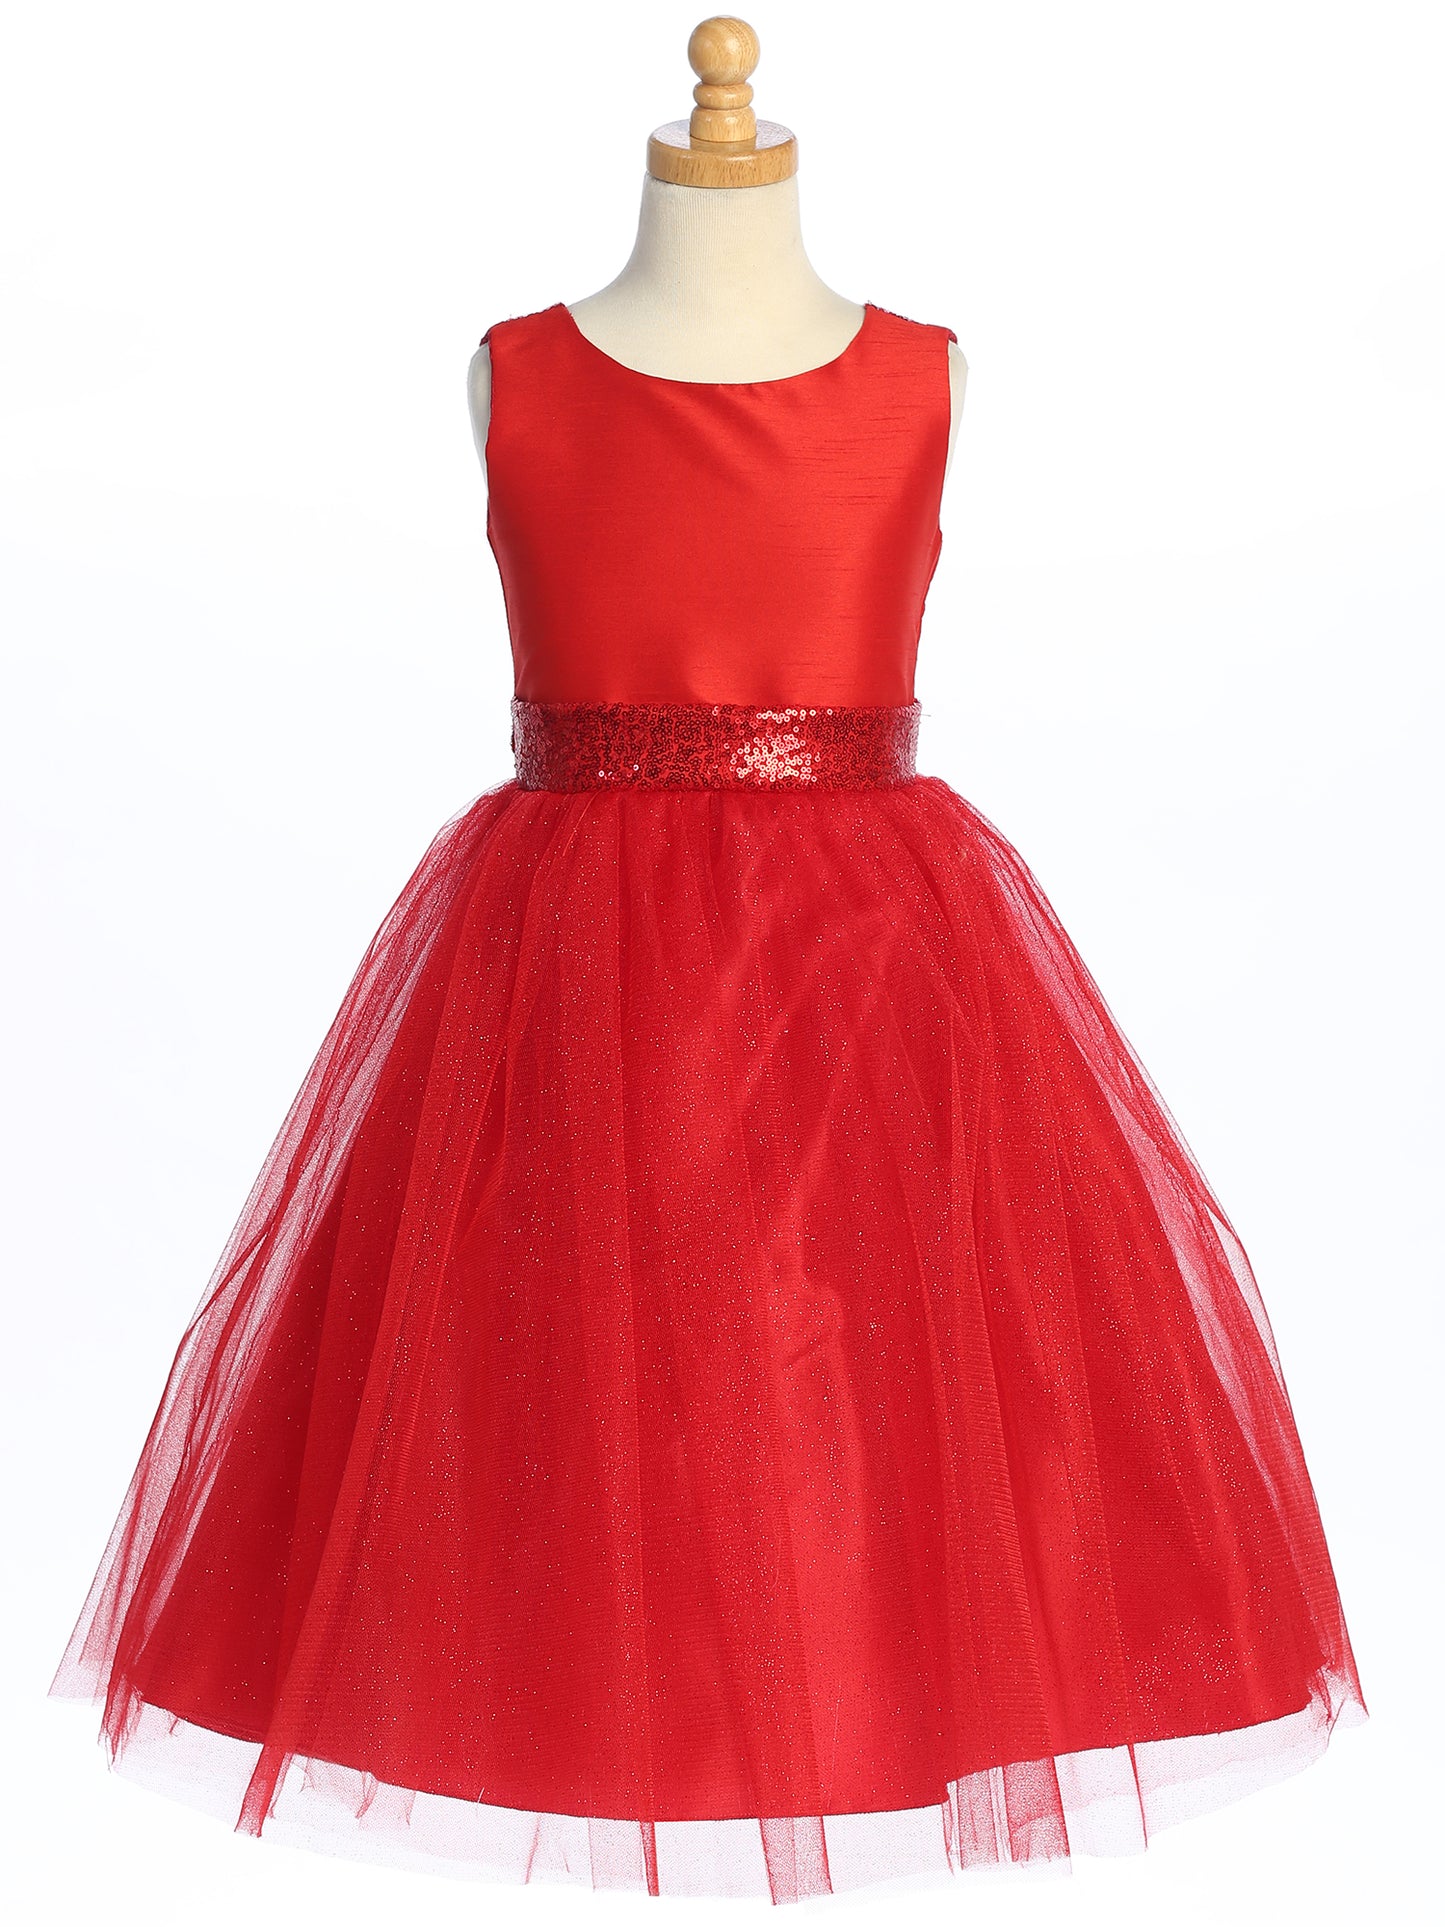 Red Shantung and Sparkle Tulle Dress with Sequin Sash - BL255-RED